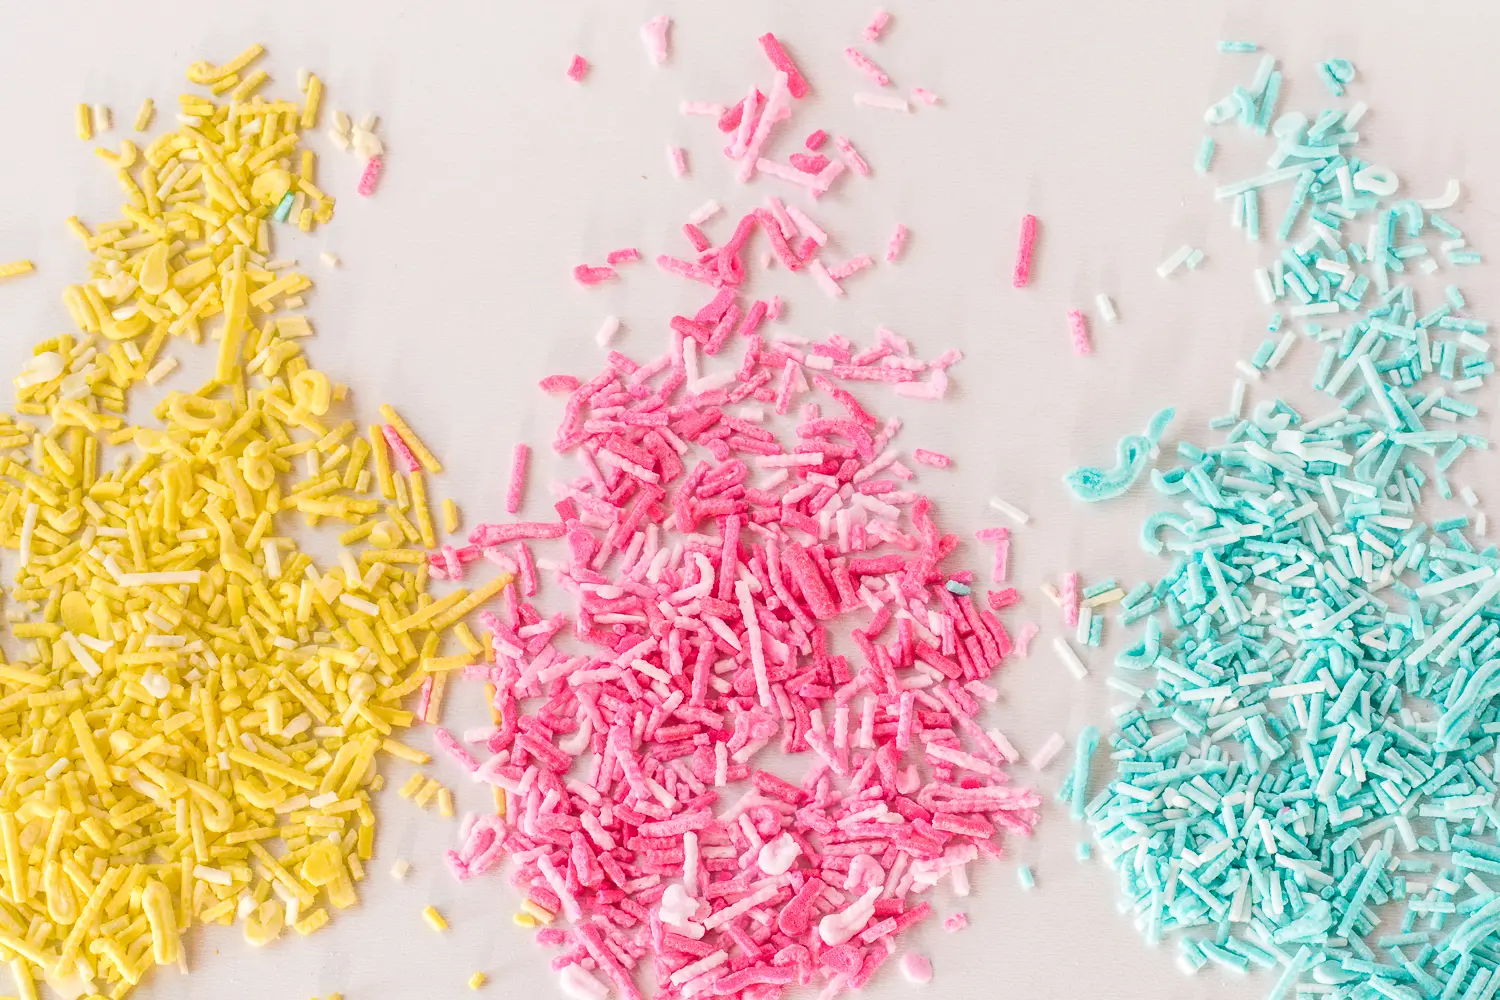 yellow, pink and blue sugar-free sprinkles spread on a white background 